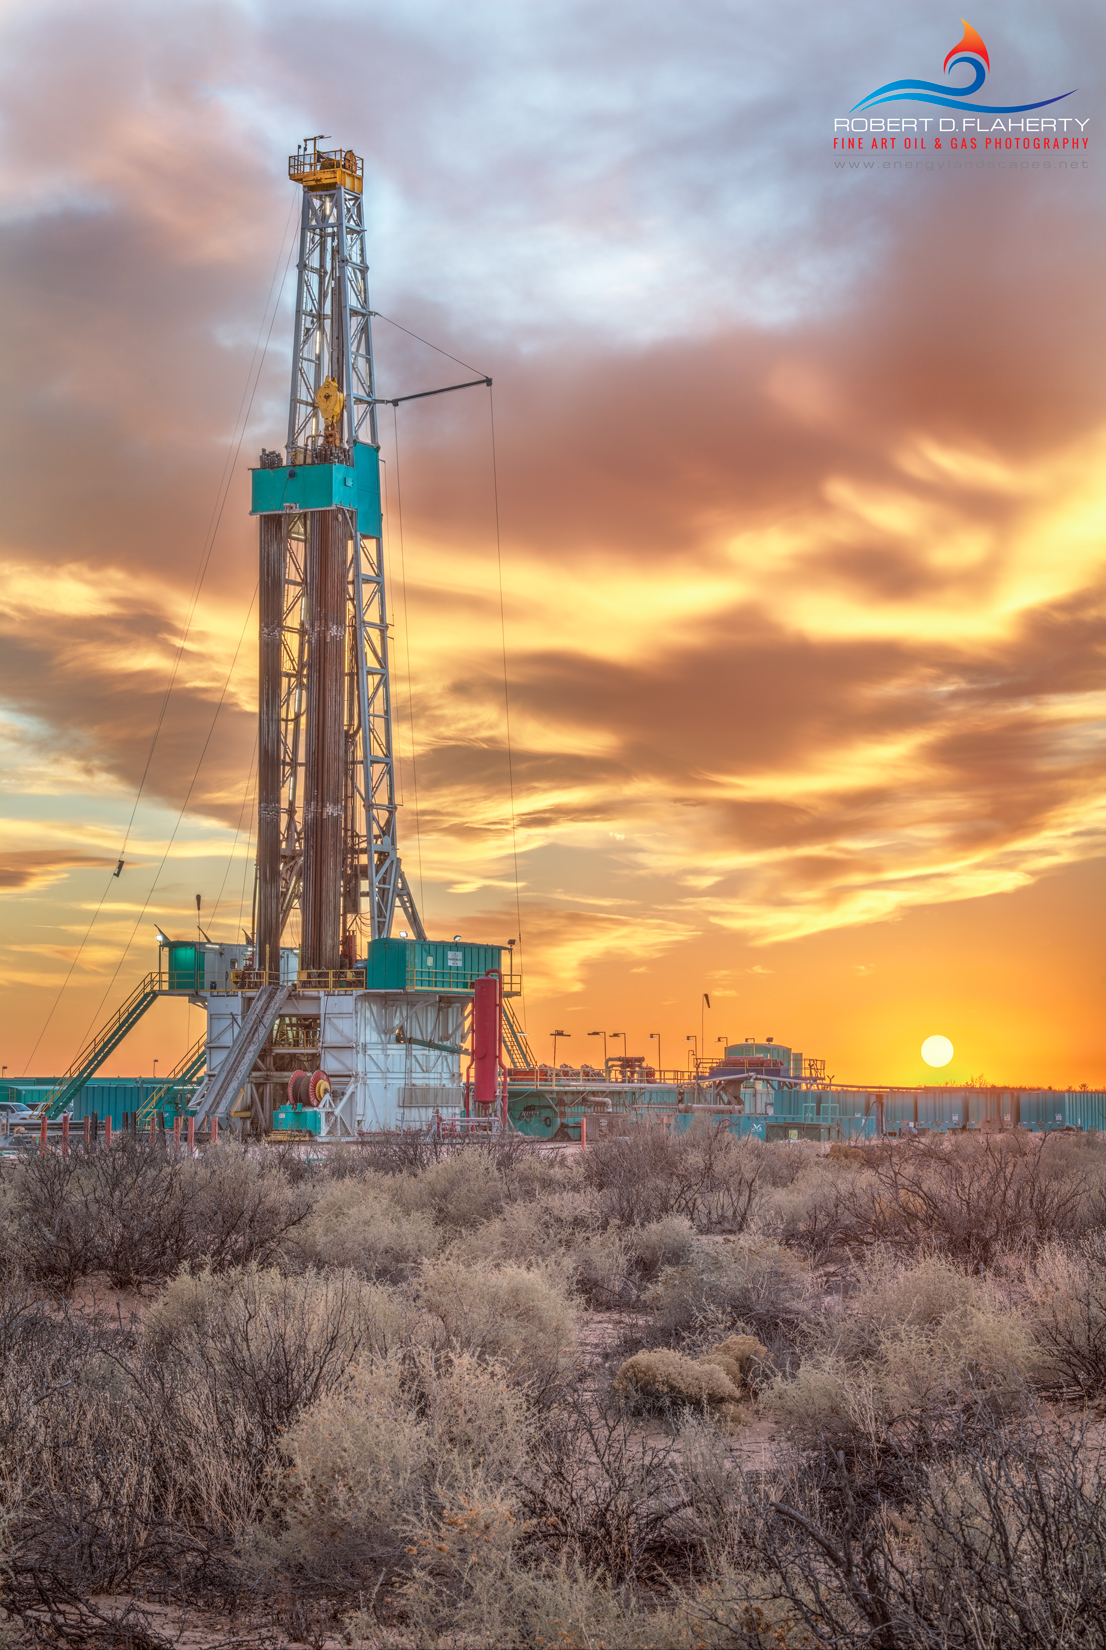 The Golden Moment features Frontier Rig 26 drilling a deep directional well in the Northern Delaware Basin. Wether on fine art...